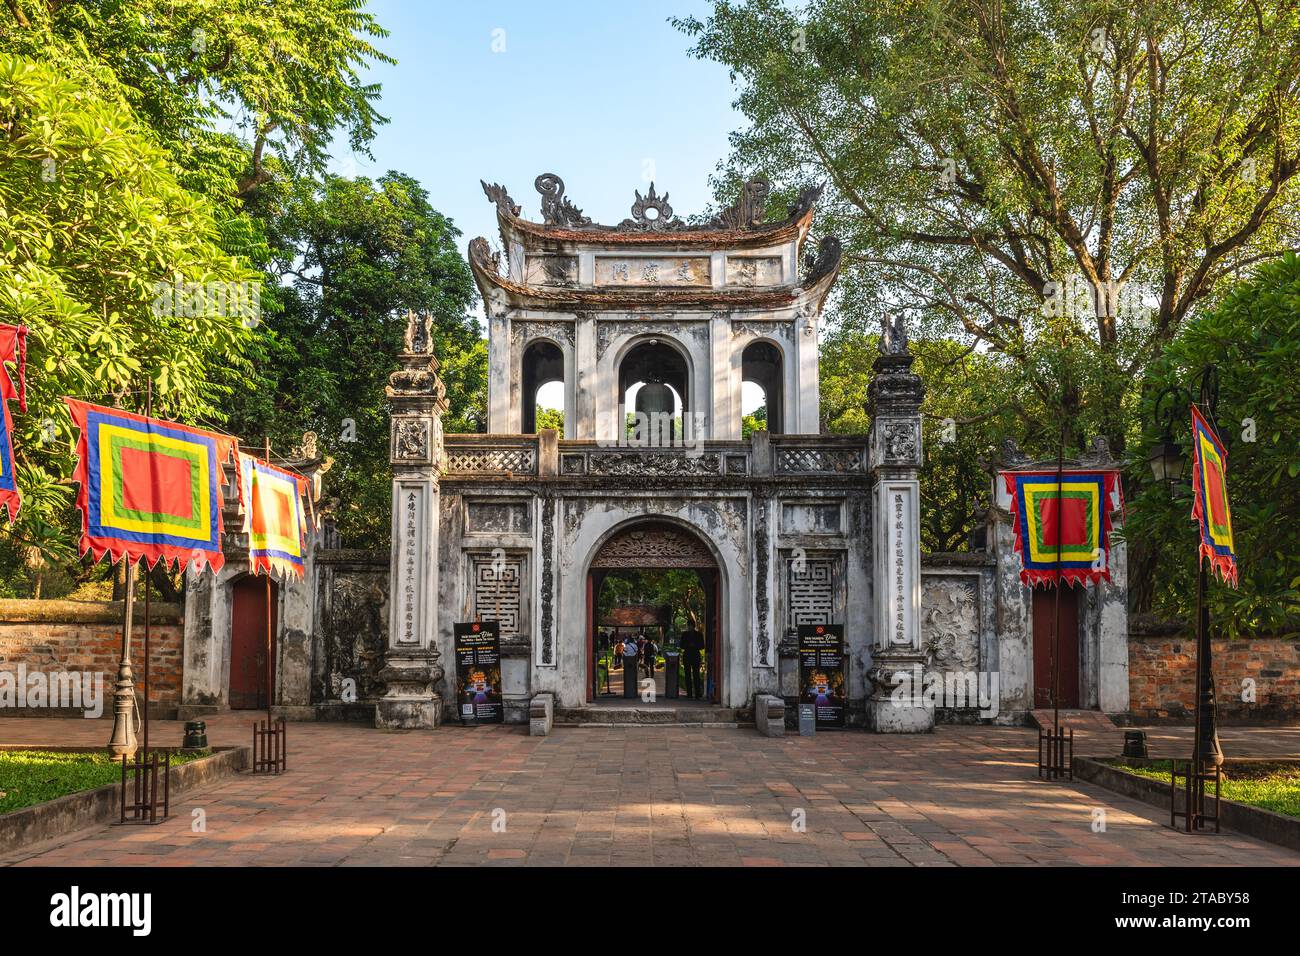 November 17, 2023: Gate to the Temple of Literature, a temple dedicated to Confucius in Hanoi, Vietnam established in 1070. It also hosts the Imperial Stock Photo